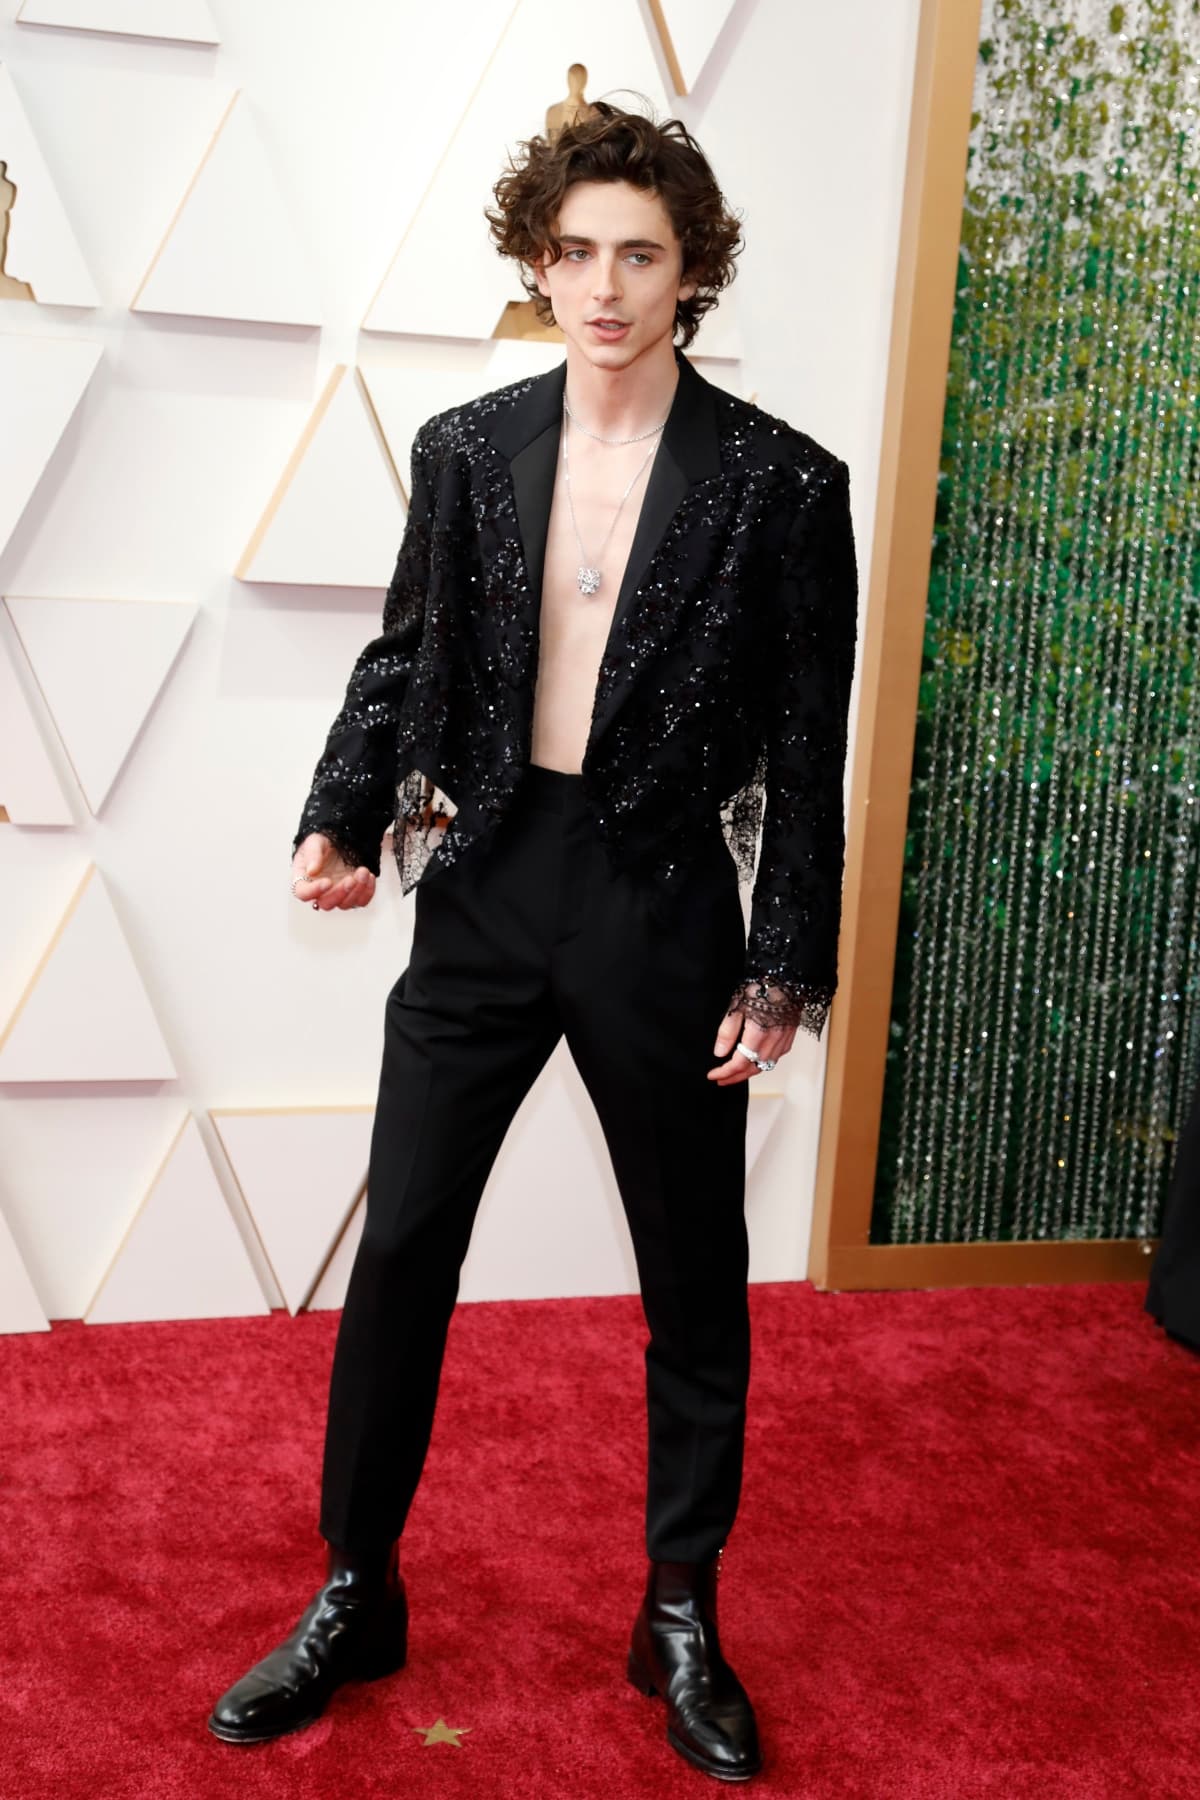 Timothee Chalamet shirtless at the Oscars